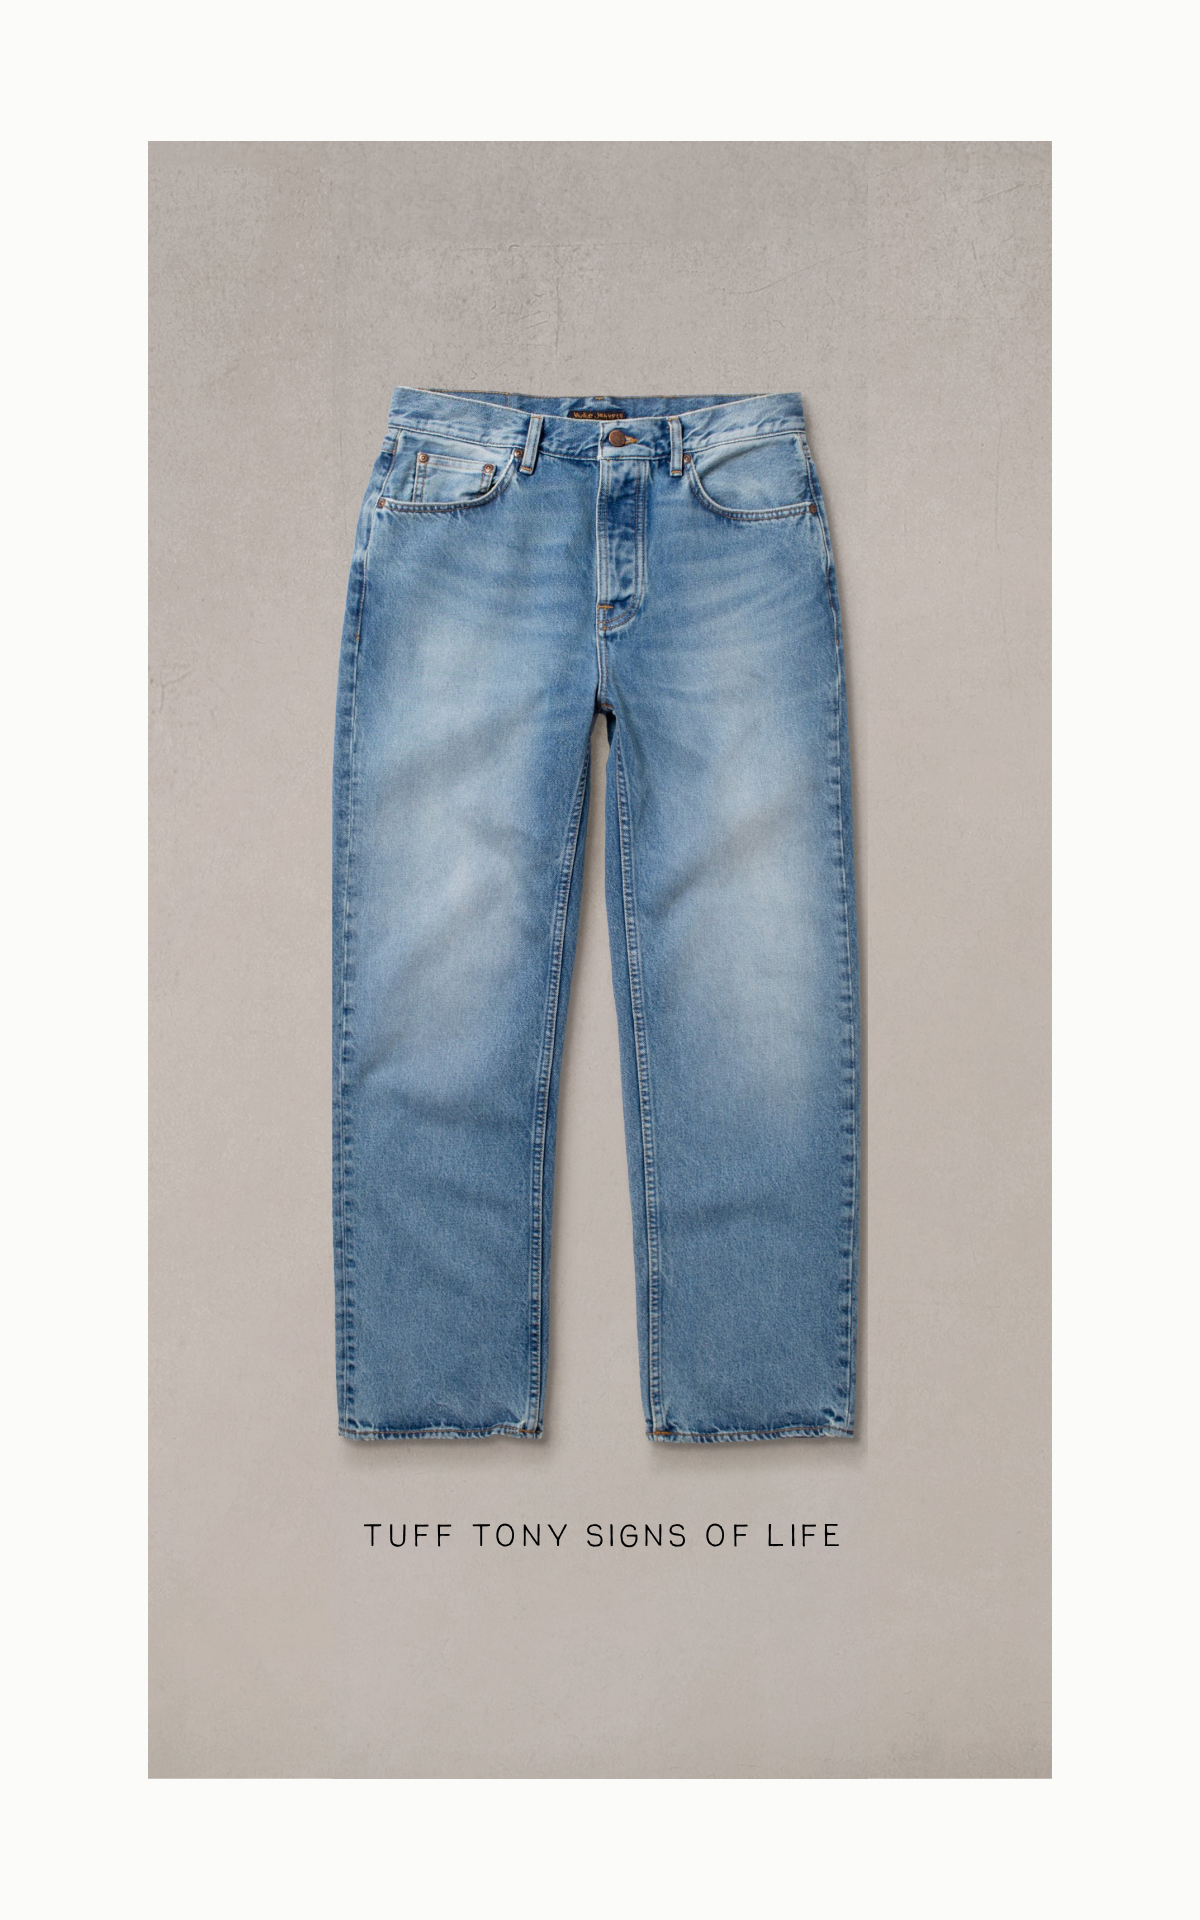 Nudie Jeans Little Collins St - Petre Andreevski Thin Finn Dry